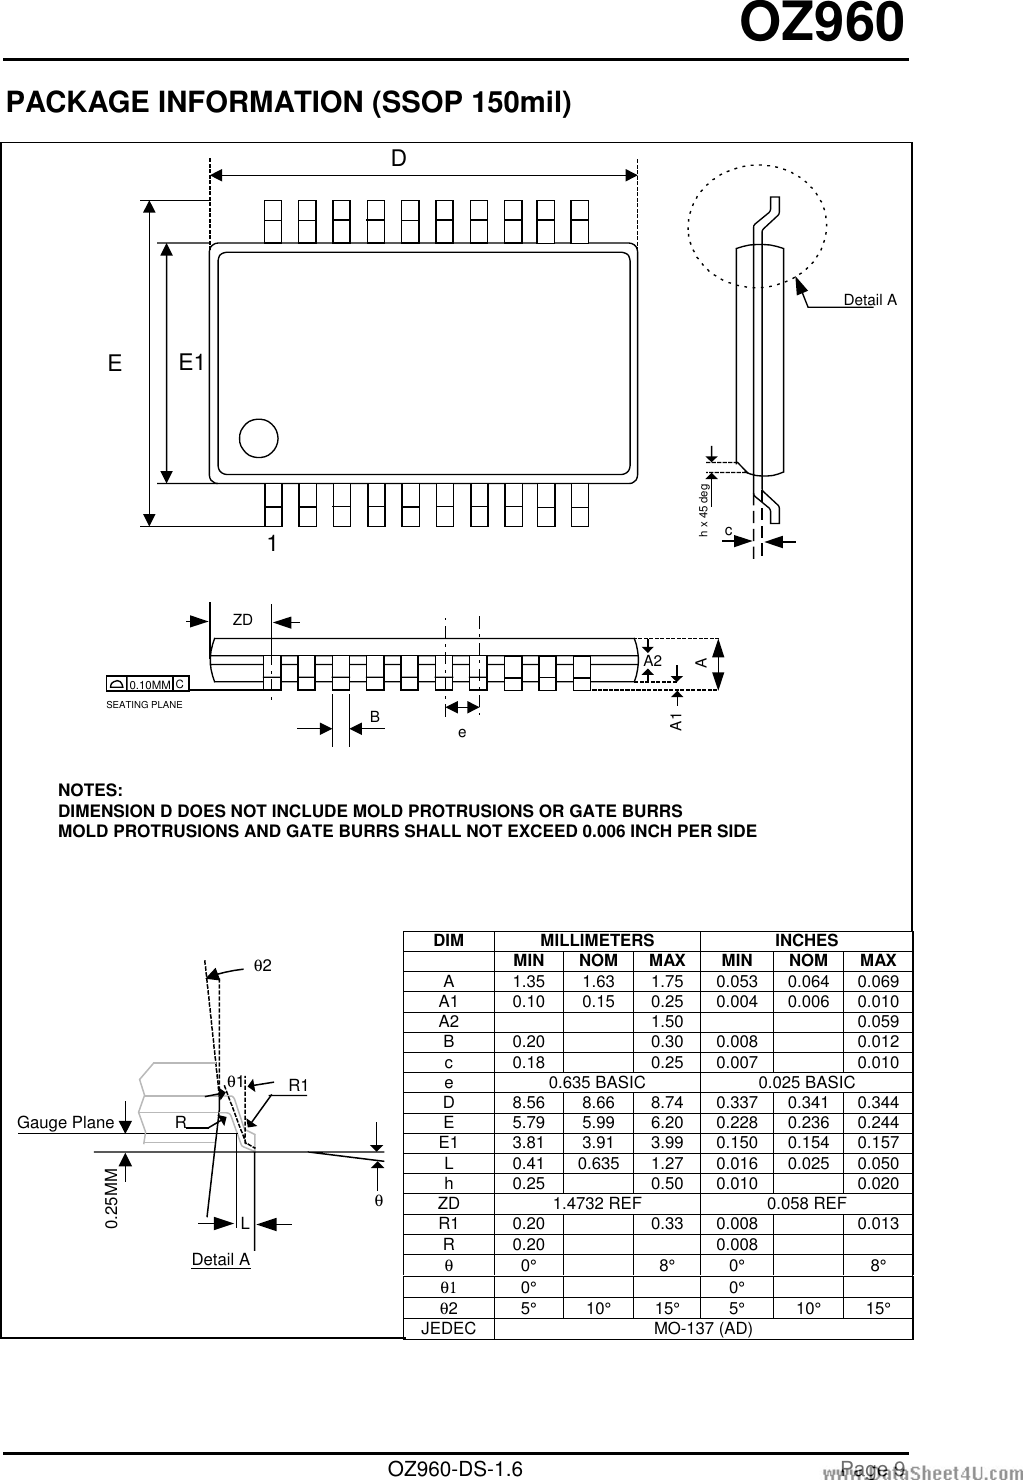 Page 9 of 12 - CCFL Backlight Controller 2008129131956425